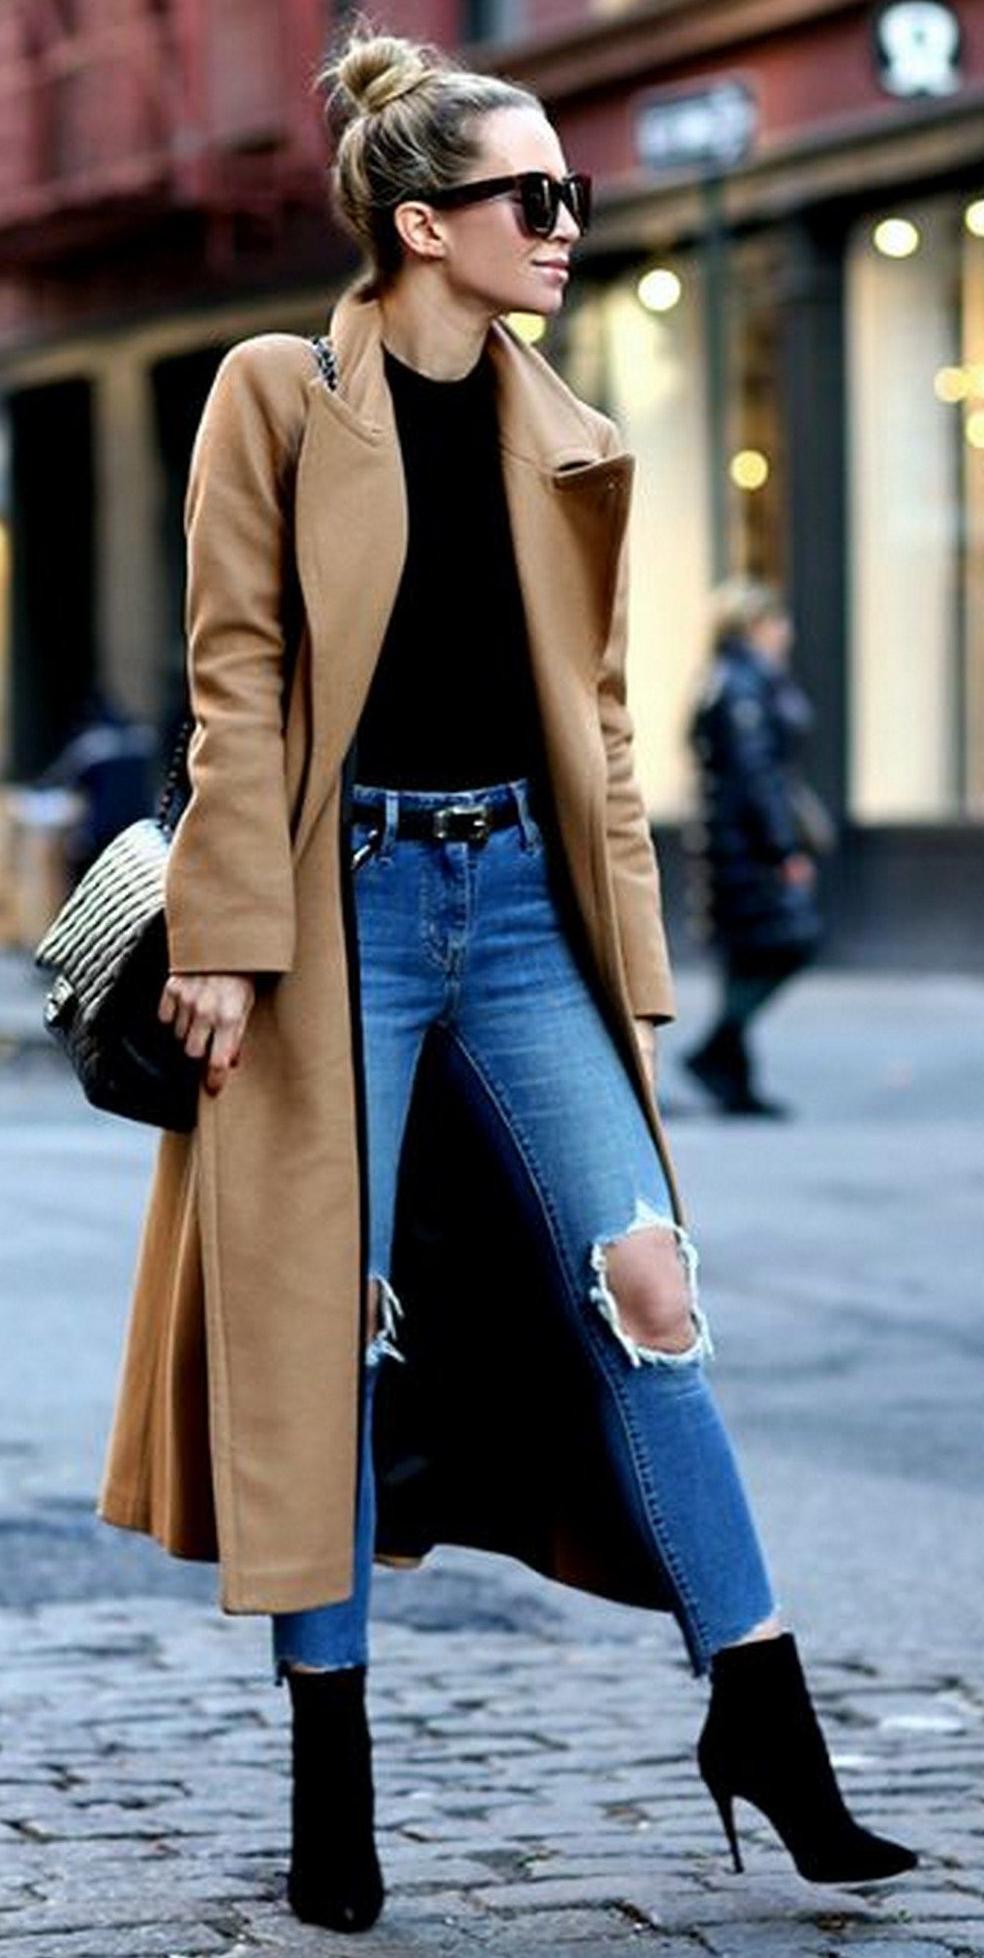 Ankle Boots And Jeans Combination For Ladies 2023 | ShoesOutfitIdeas.com